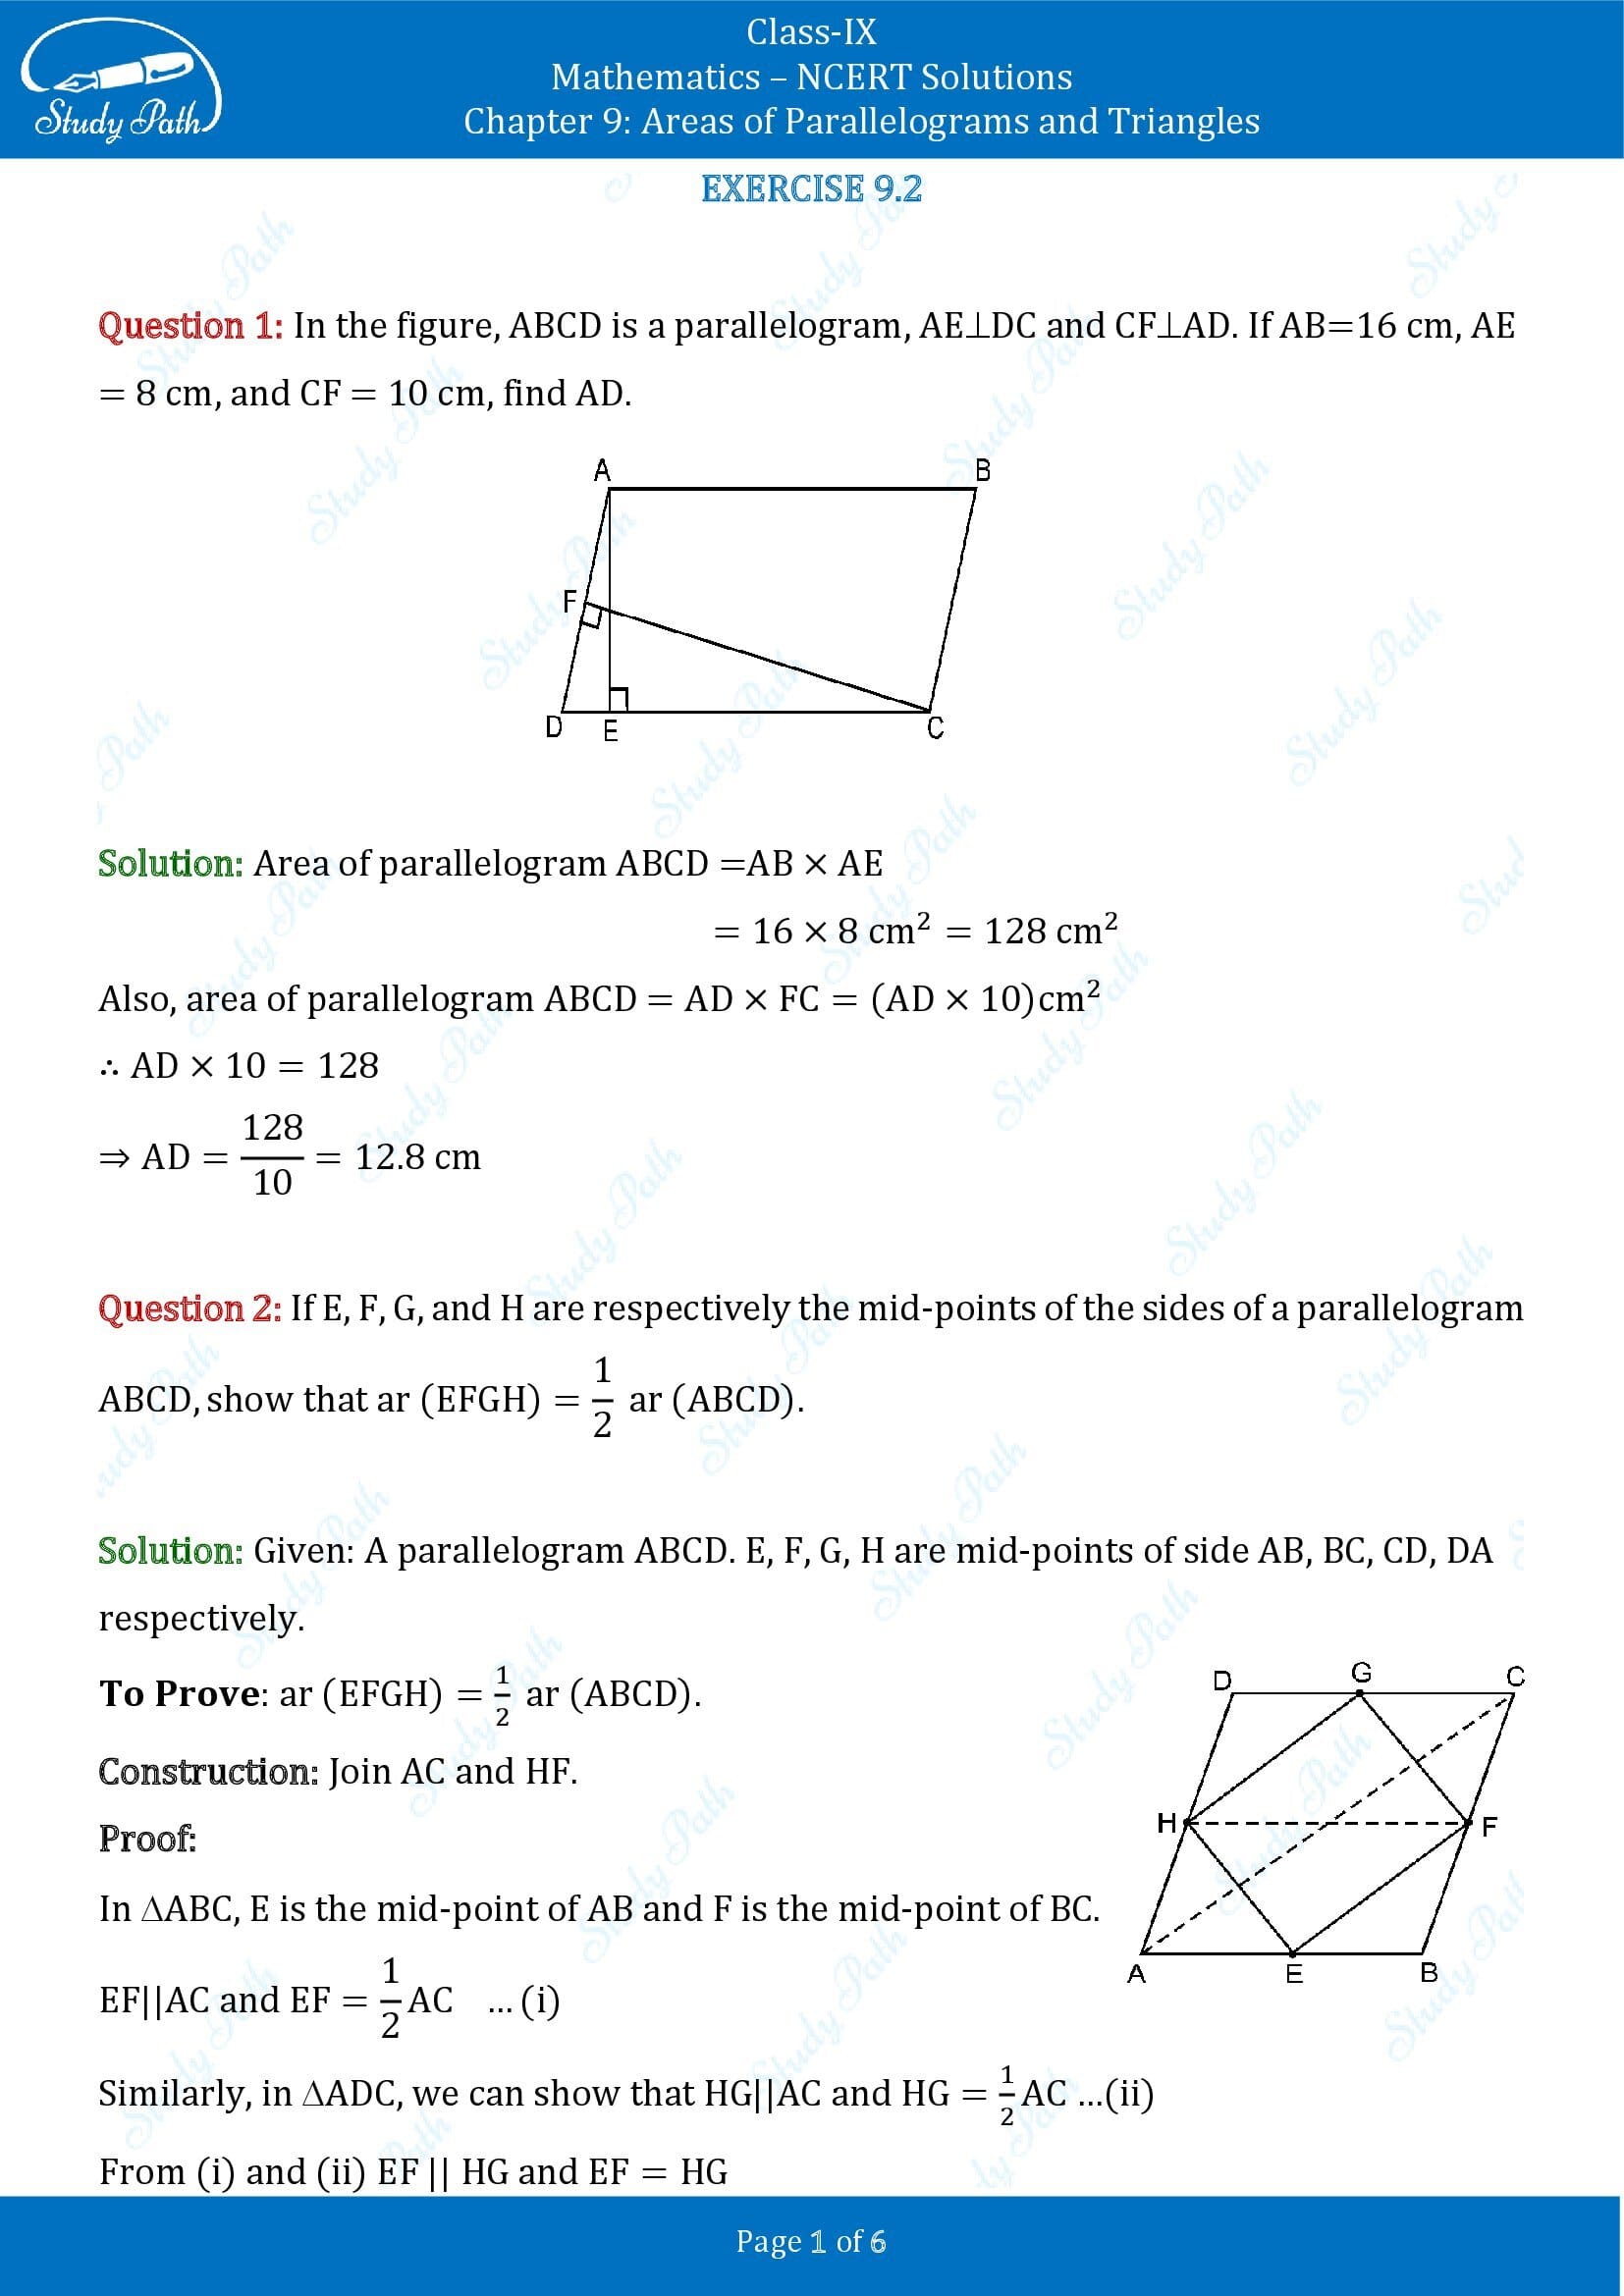 NCERT Solutions for Class 9 Maths Chapter 9 Areas of Parallelograms and Triangles Exercise 9.2 00001